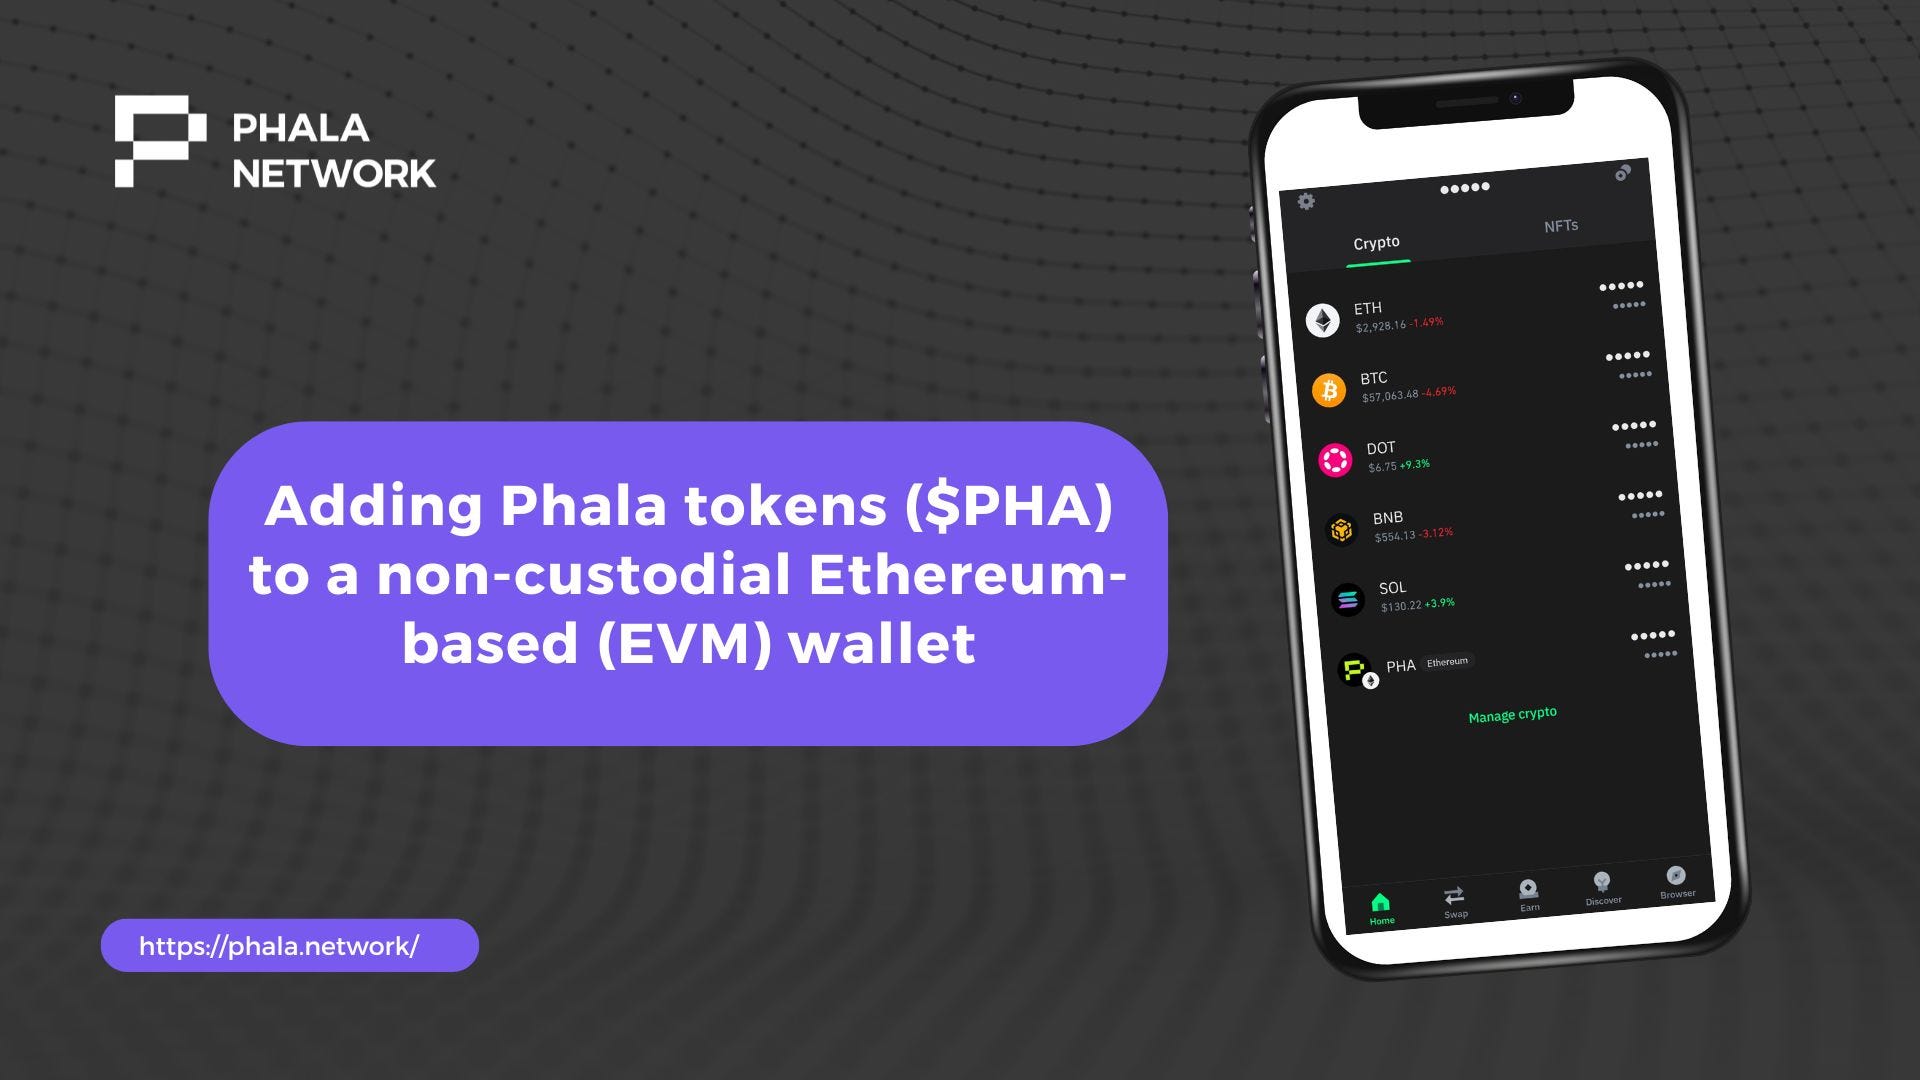 How To Add Phala Tokens ($Pha) on Ethereum Network To Non-custodial Ethereum-based (EVM) Wallet